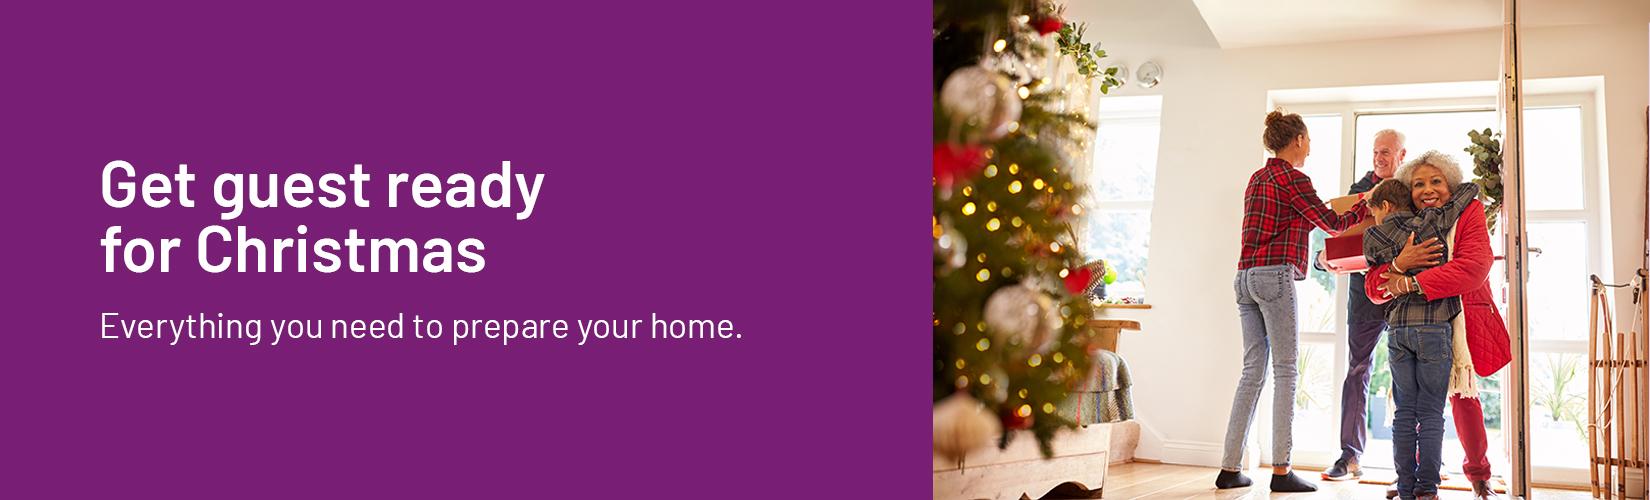 Get guest ready for Christmas. Everything you need to prepare your home.